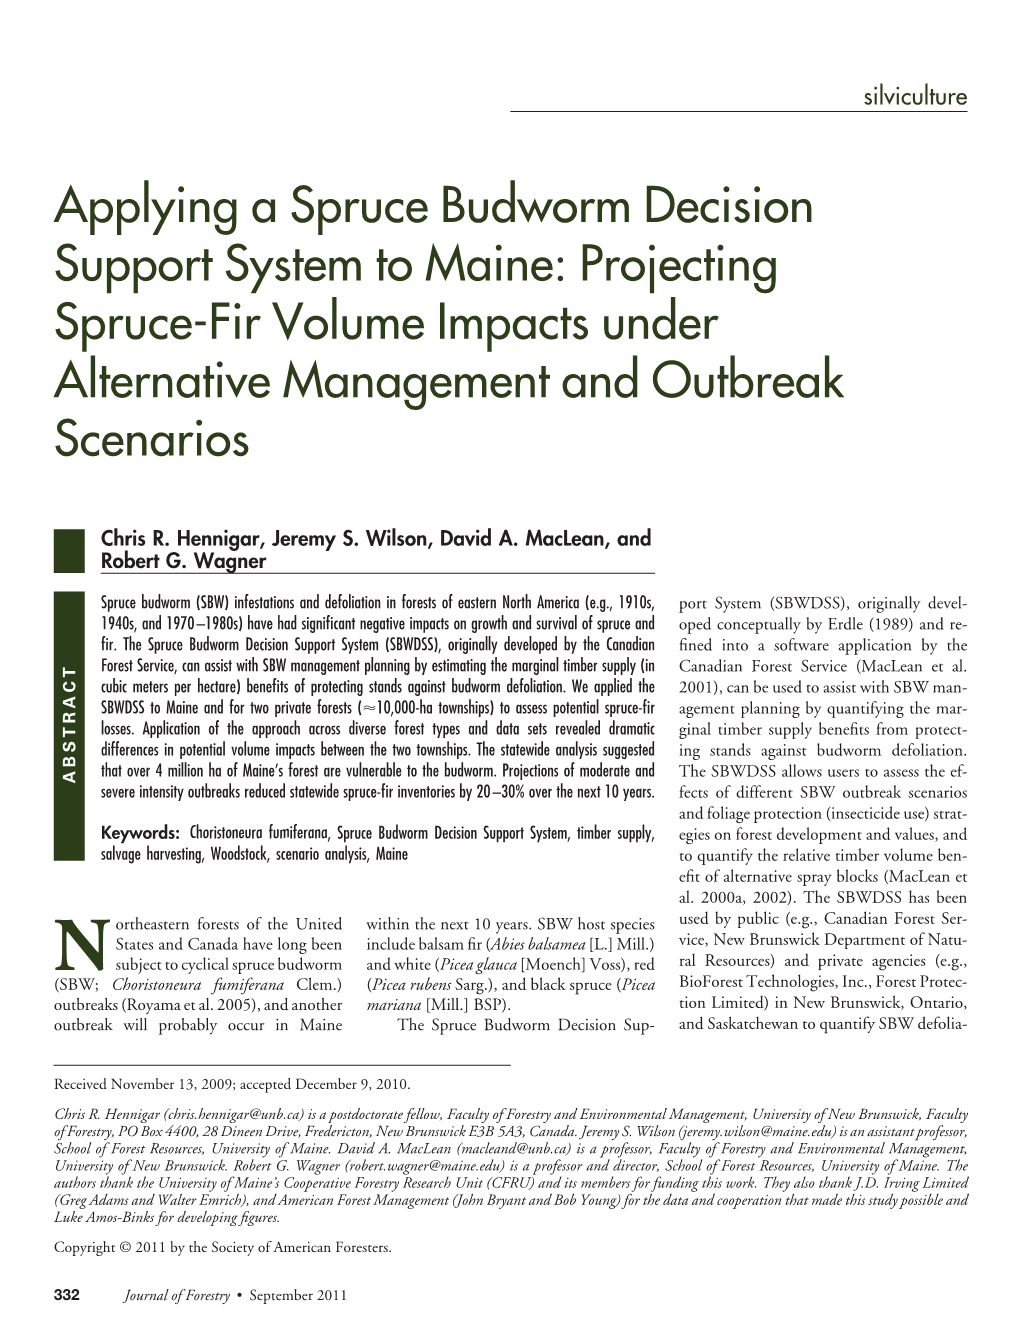 Spruce Budworm Decision Support System to Maine: Projecting Spruce-Fir Volume Impacts Under Alternative Management and Outbreak Scenarios